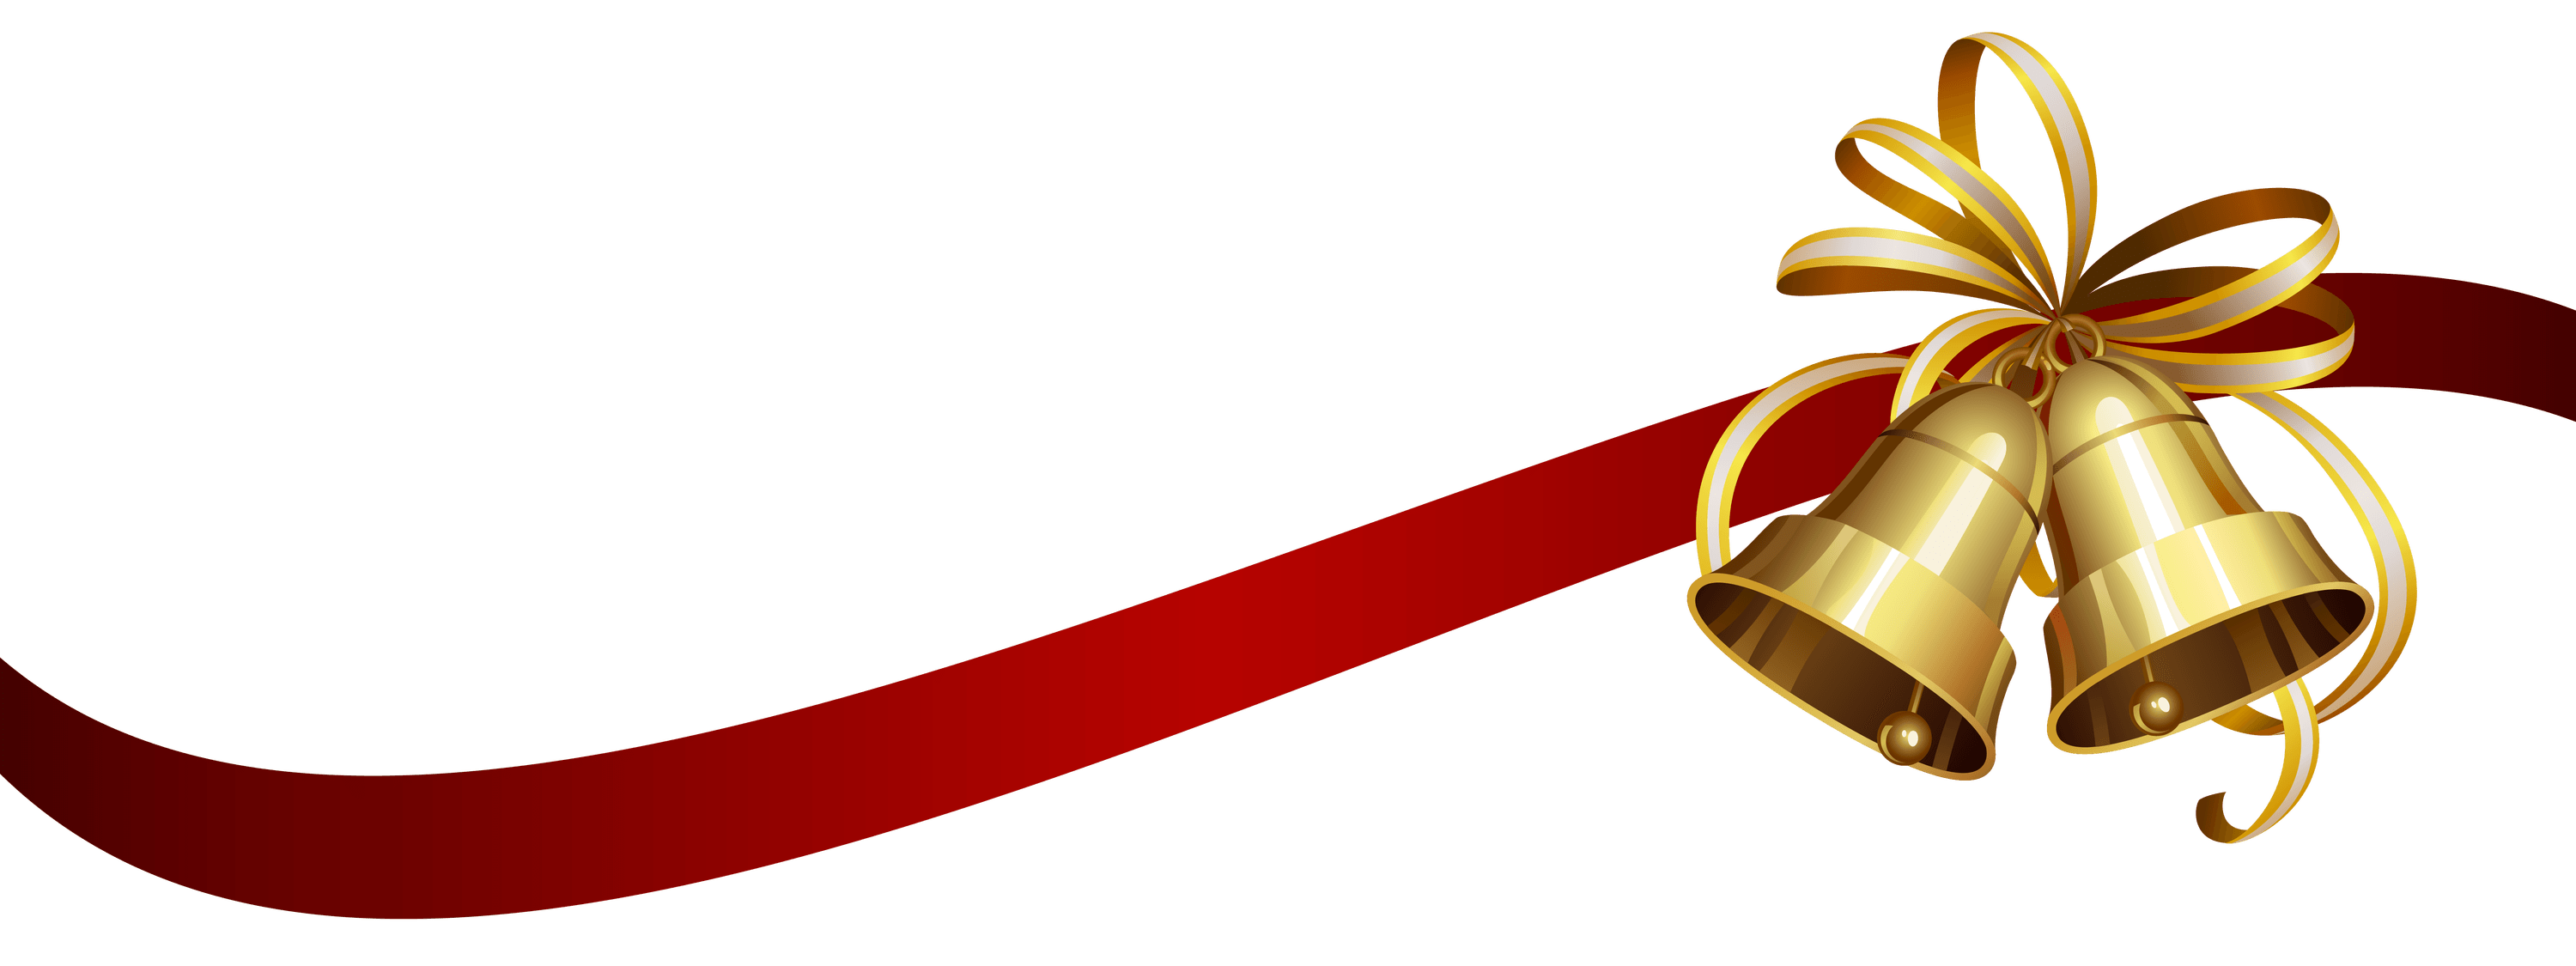 Red Christmas Ribbon Transparent Background